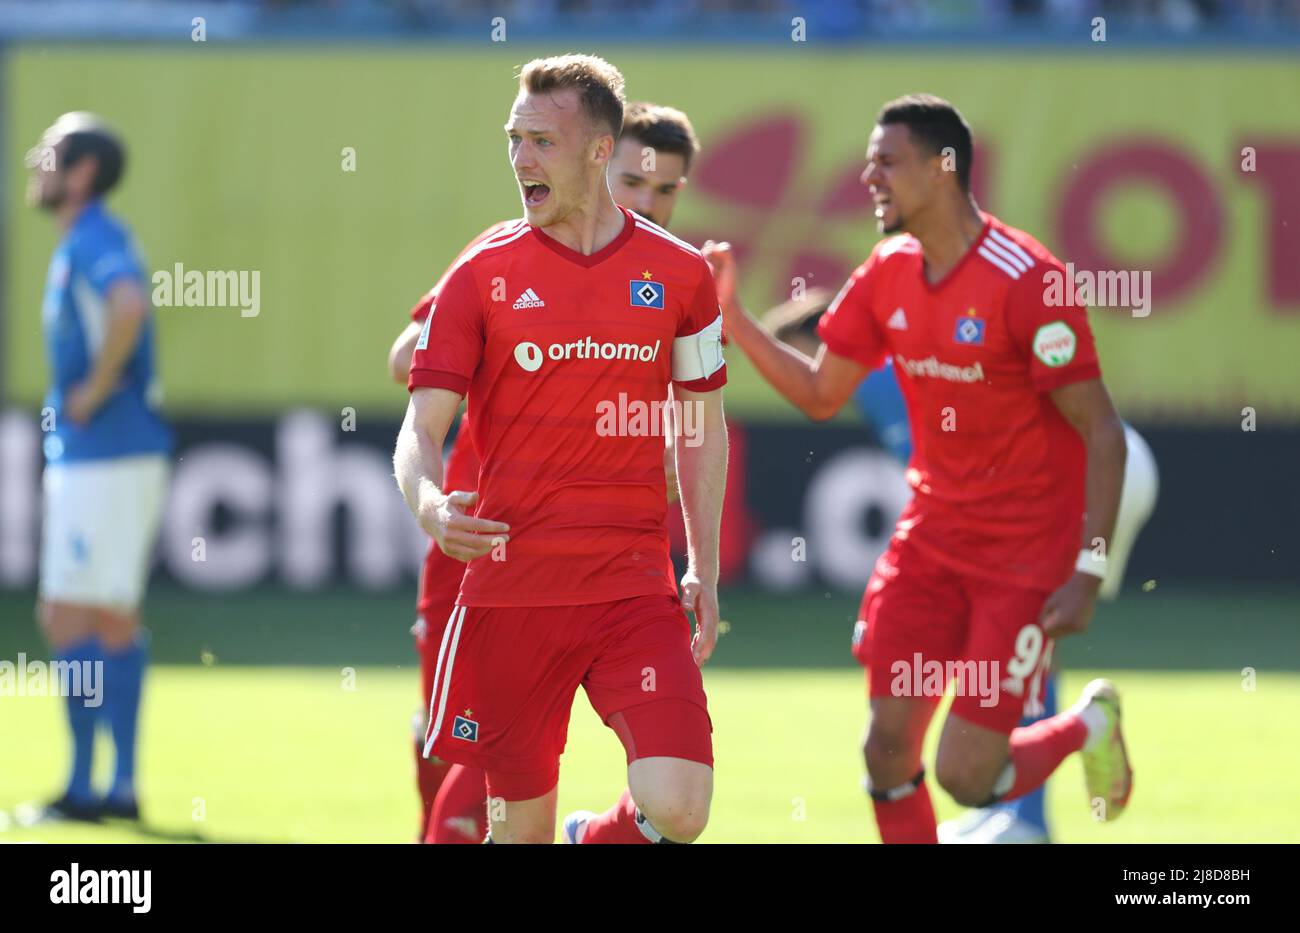 Rostock, Germany. 15th May, 2022. Soccer: 2nd Bundesliga, Hansa Rostock - Hamburger SV, Matchday 34, Ostseestadion. Sebastian Schonlau (front) of Hamburger SV celebrates his goal to make it 1:2. Credit: Danny Gohlke/dpa - IMPORTANT NOTE: In accordance with the requirements of the DFL Deutsche Fußball Liga and the DFB Deutscher Fußball-Bund, it is prohibited to use or have used photographs taken in the stadium and/or of the match in the form of sequence pictures and/or video-like photo series./dpa/Alamy Live News Stock Photo